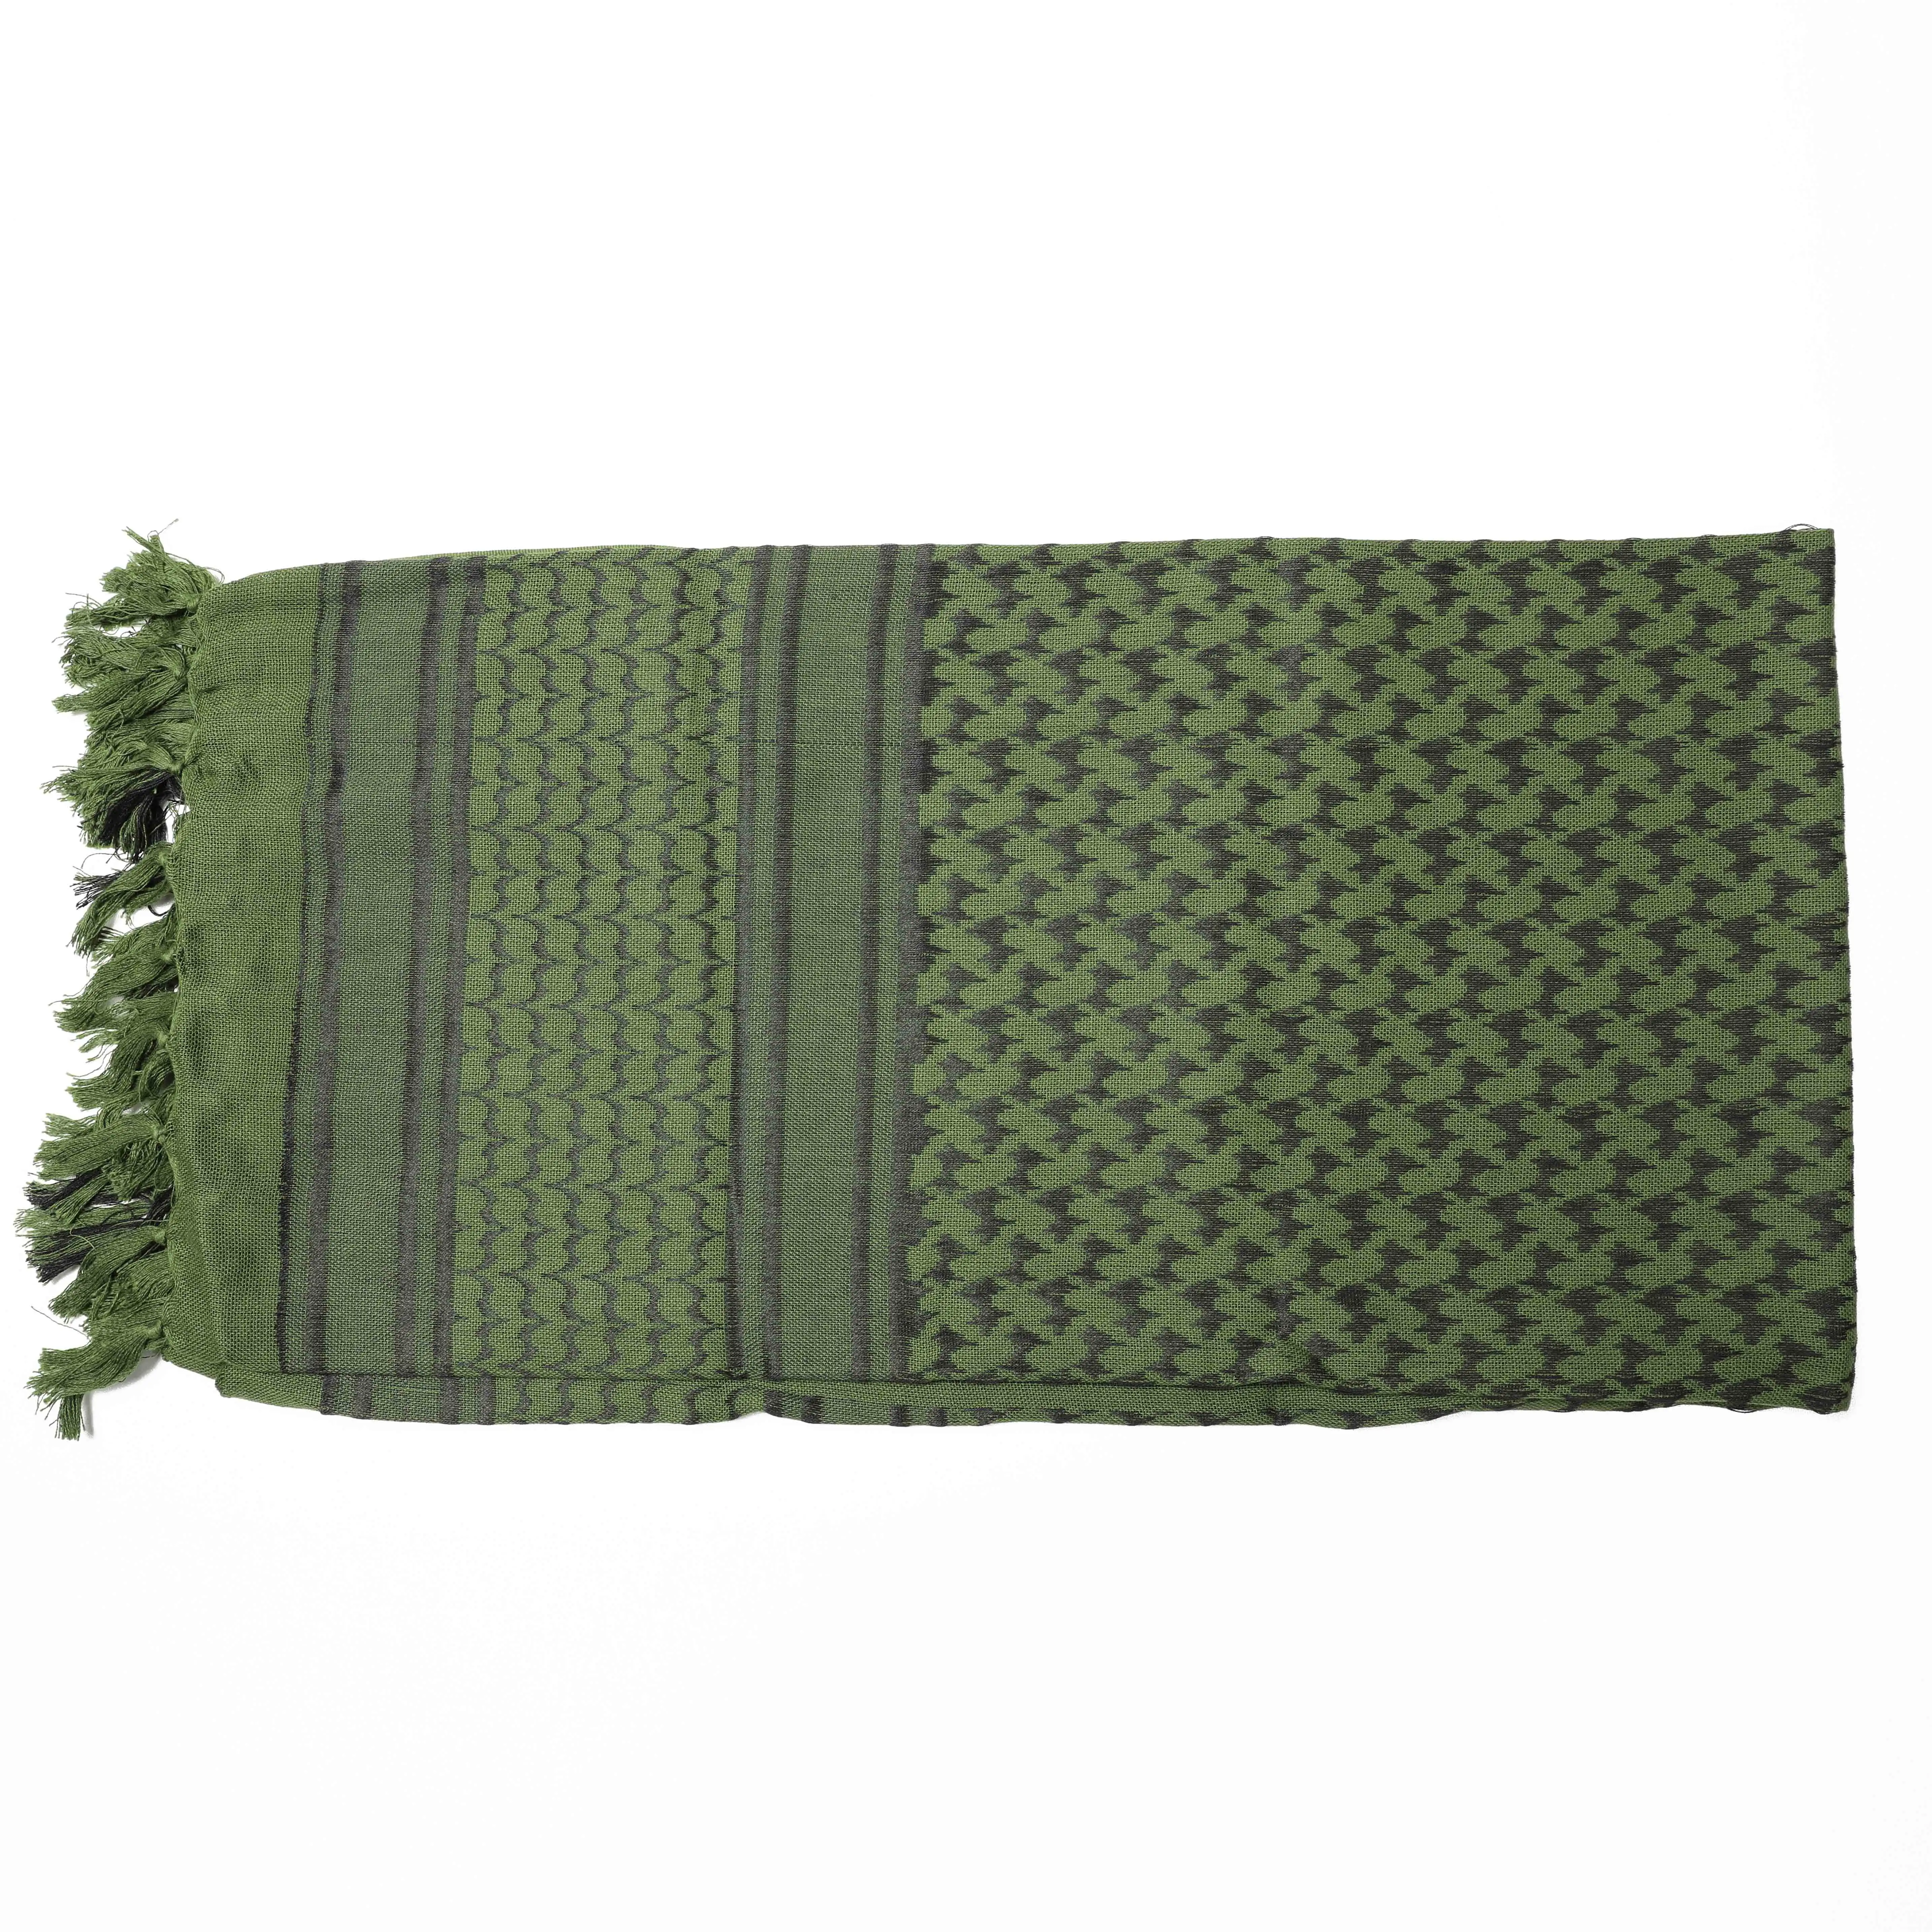 2021in Stock Winter New Arrival Factory Scarf Green Color 100% Cotton Other Scarf Mufflers